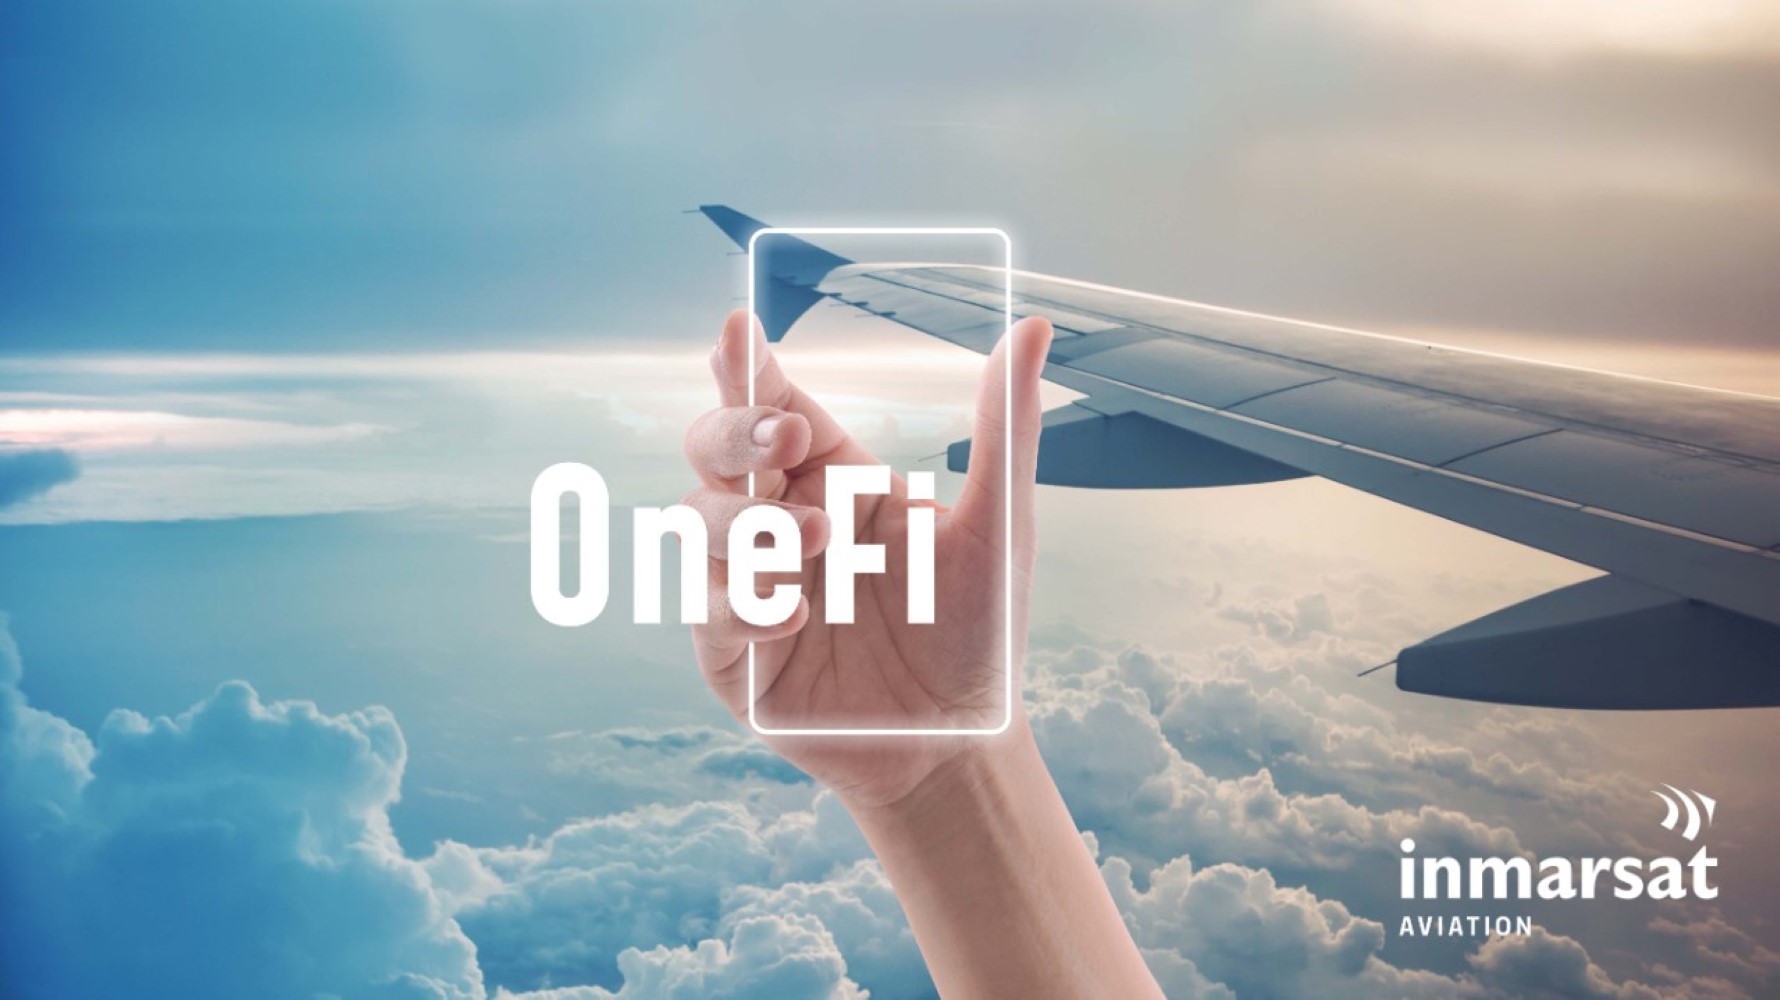 Inmarsat launches OneFi, a new customer experience platform designed to monetize inflight connectivity, enabled by Display Interactive